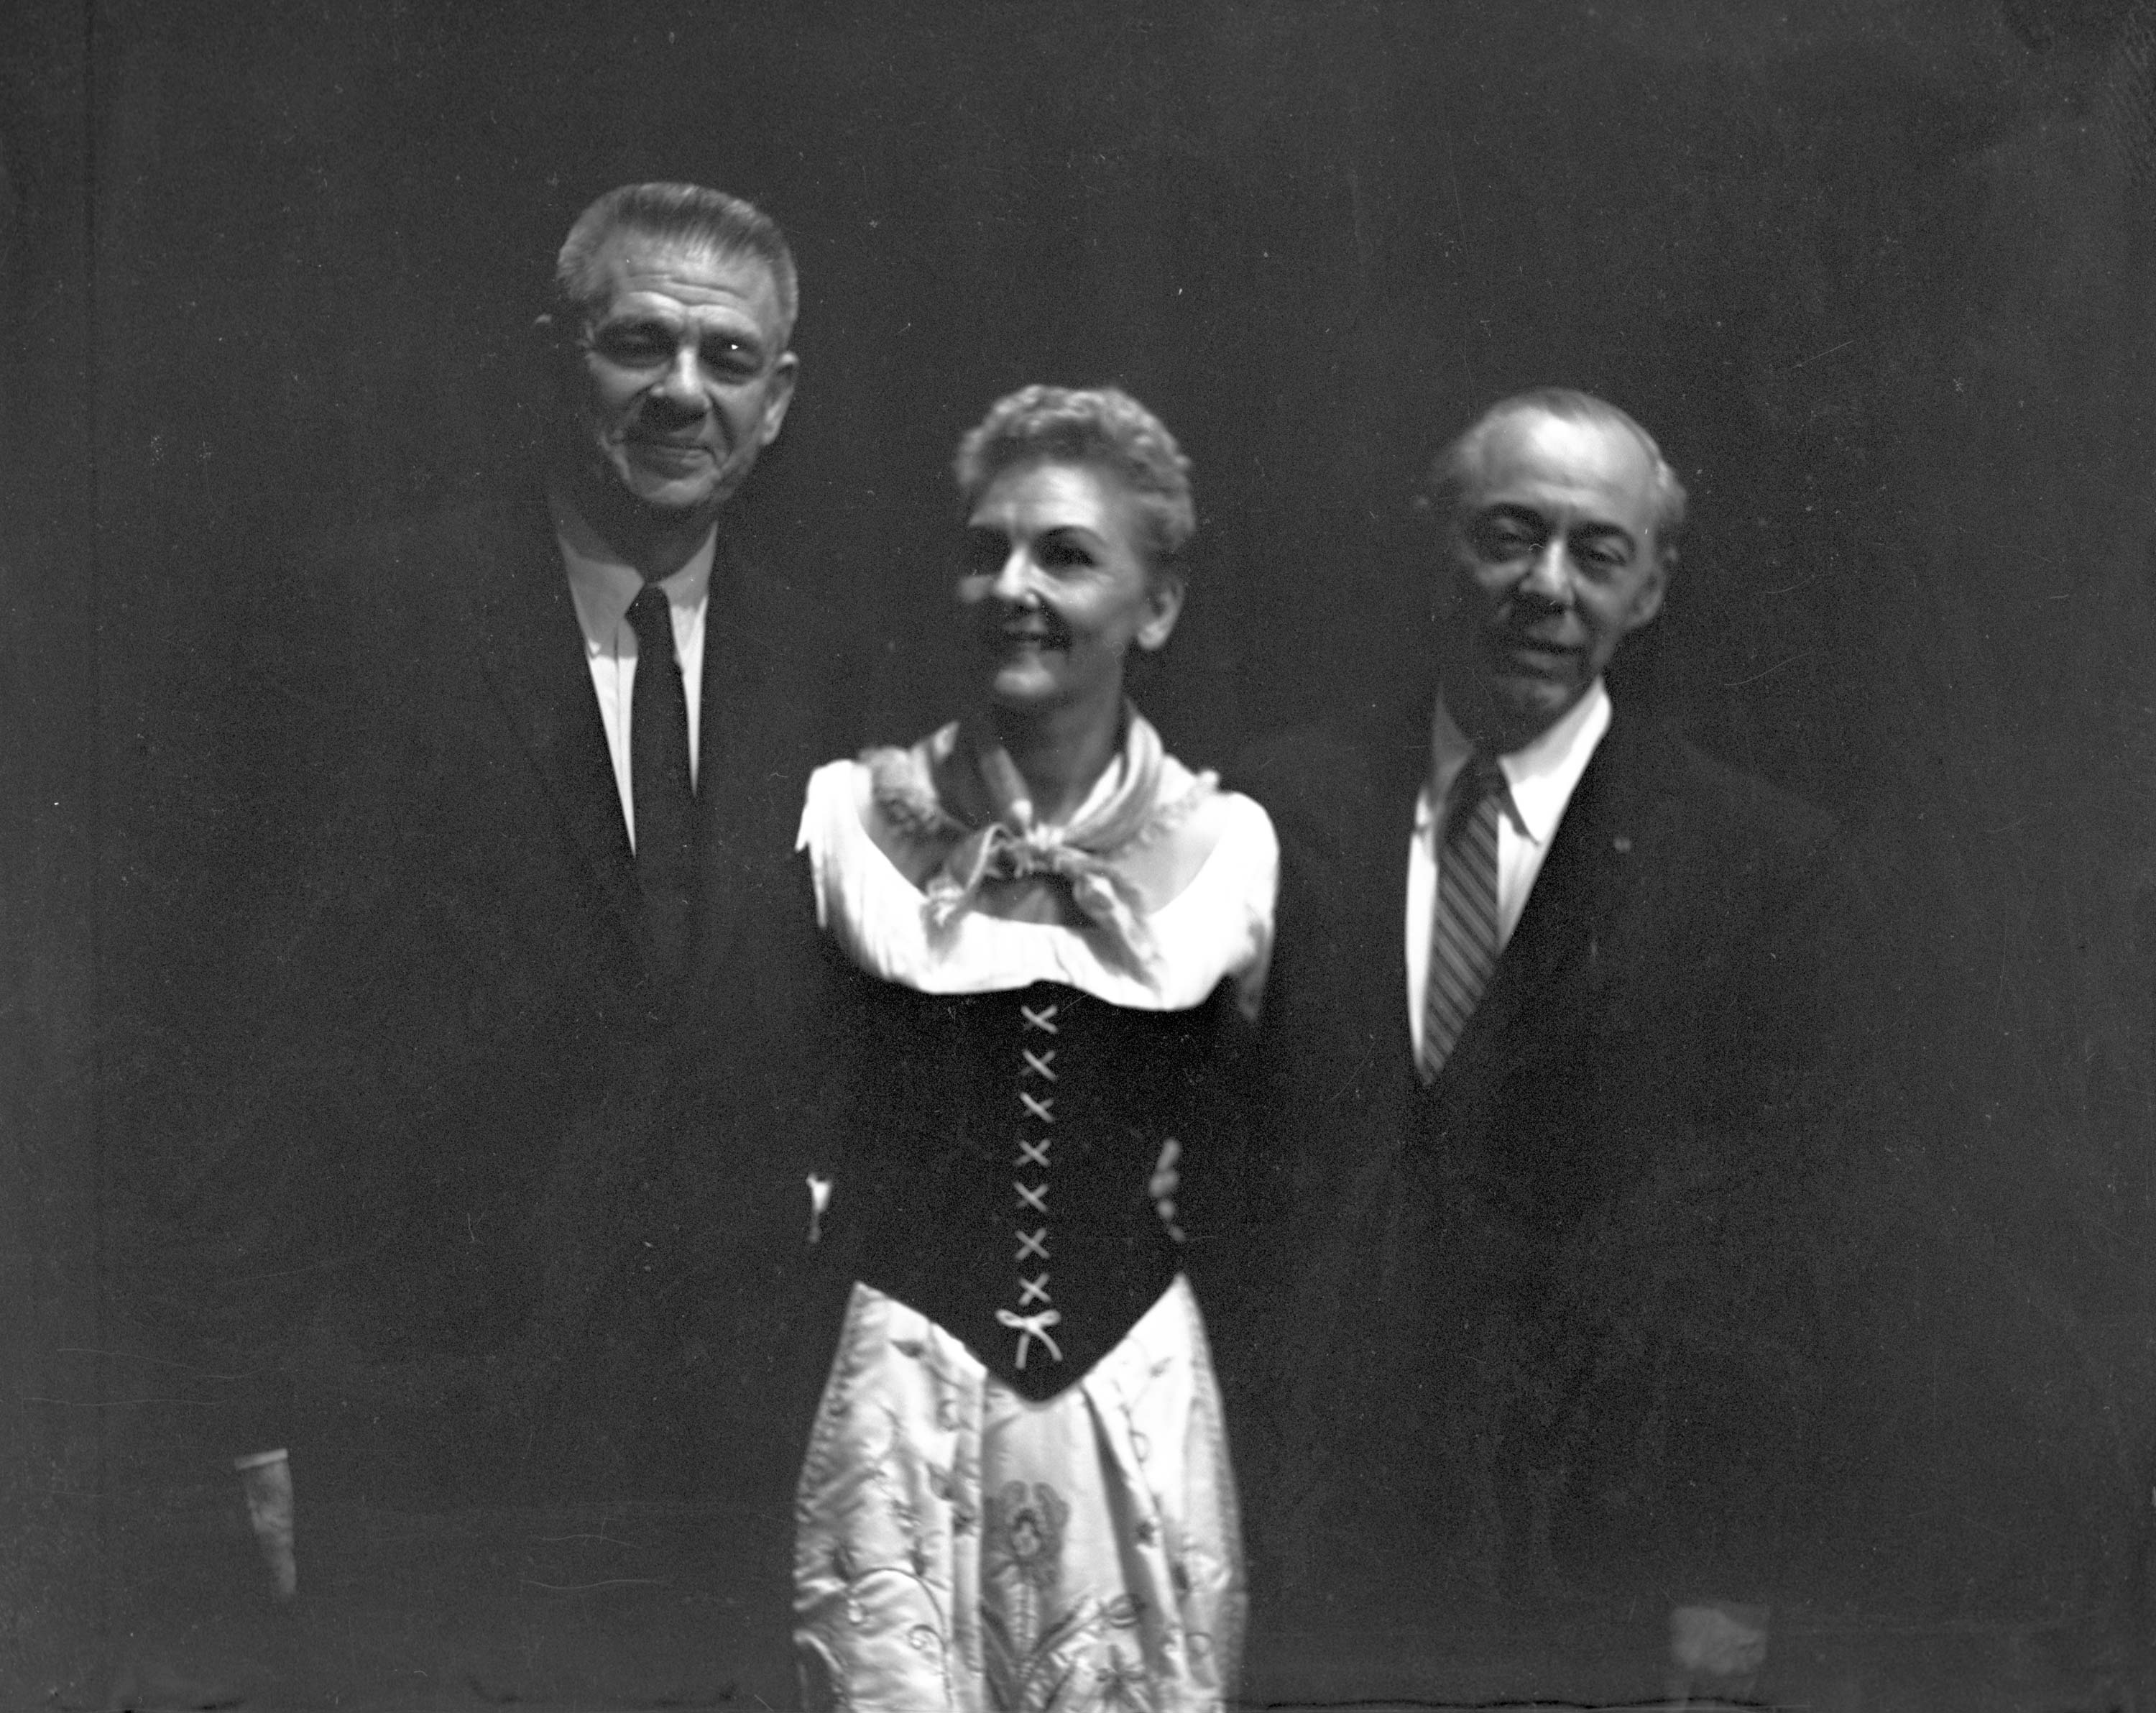 A rehearsal photo from the 1959 Broadway production of The Sound of Music.